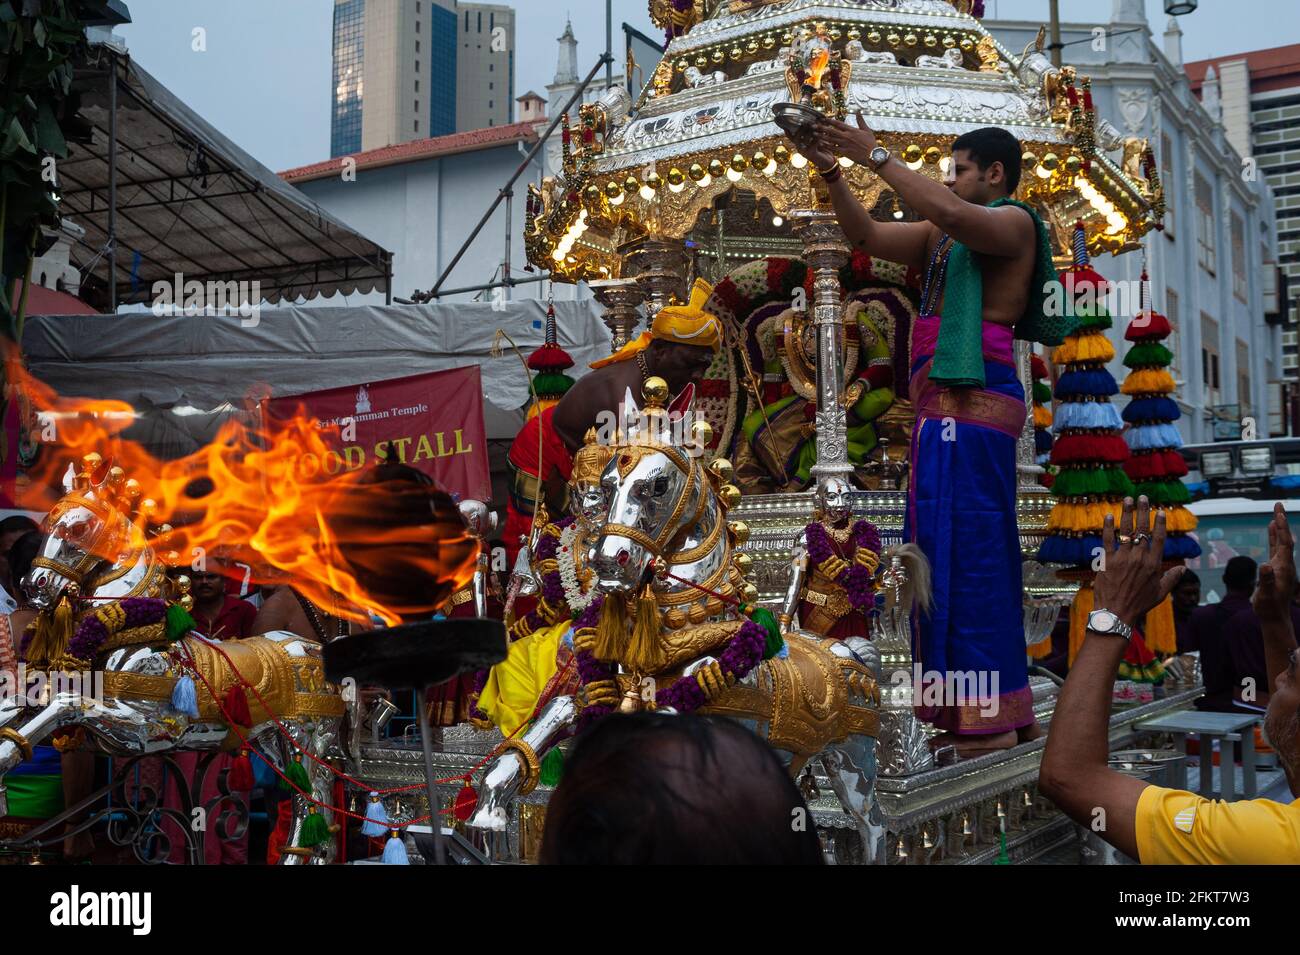 26.10.2018, Singapore, Republic of Singapore, Asia - Hindus during a traditional religious ceremony in front of the Sri Mariamman Temple in Chinatown. Stock Photo